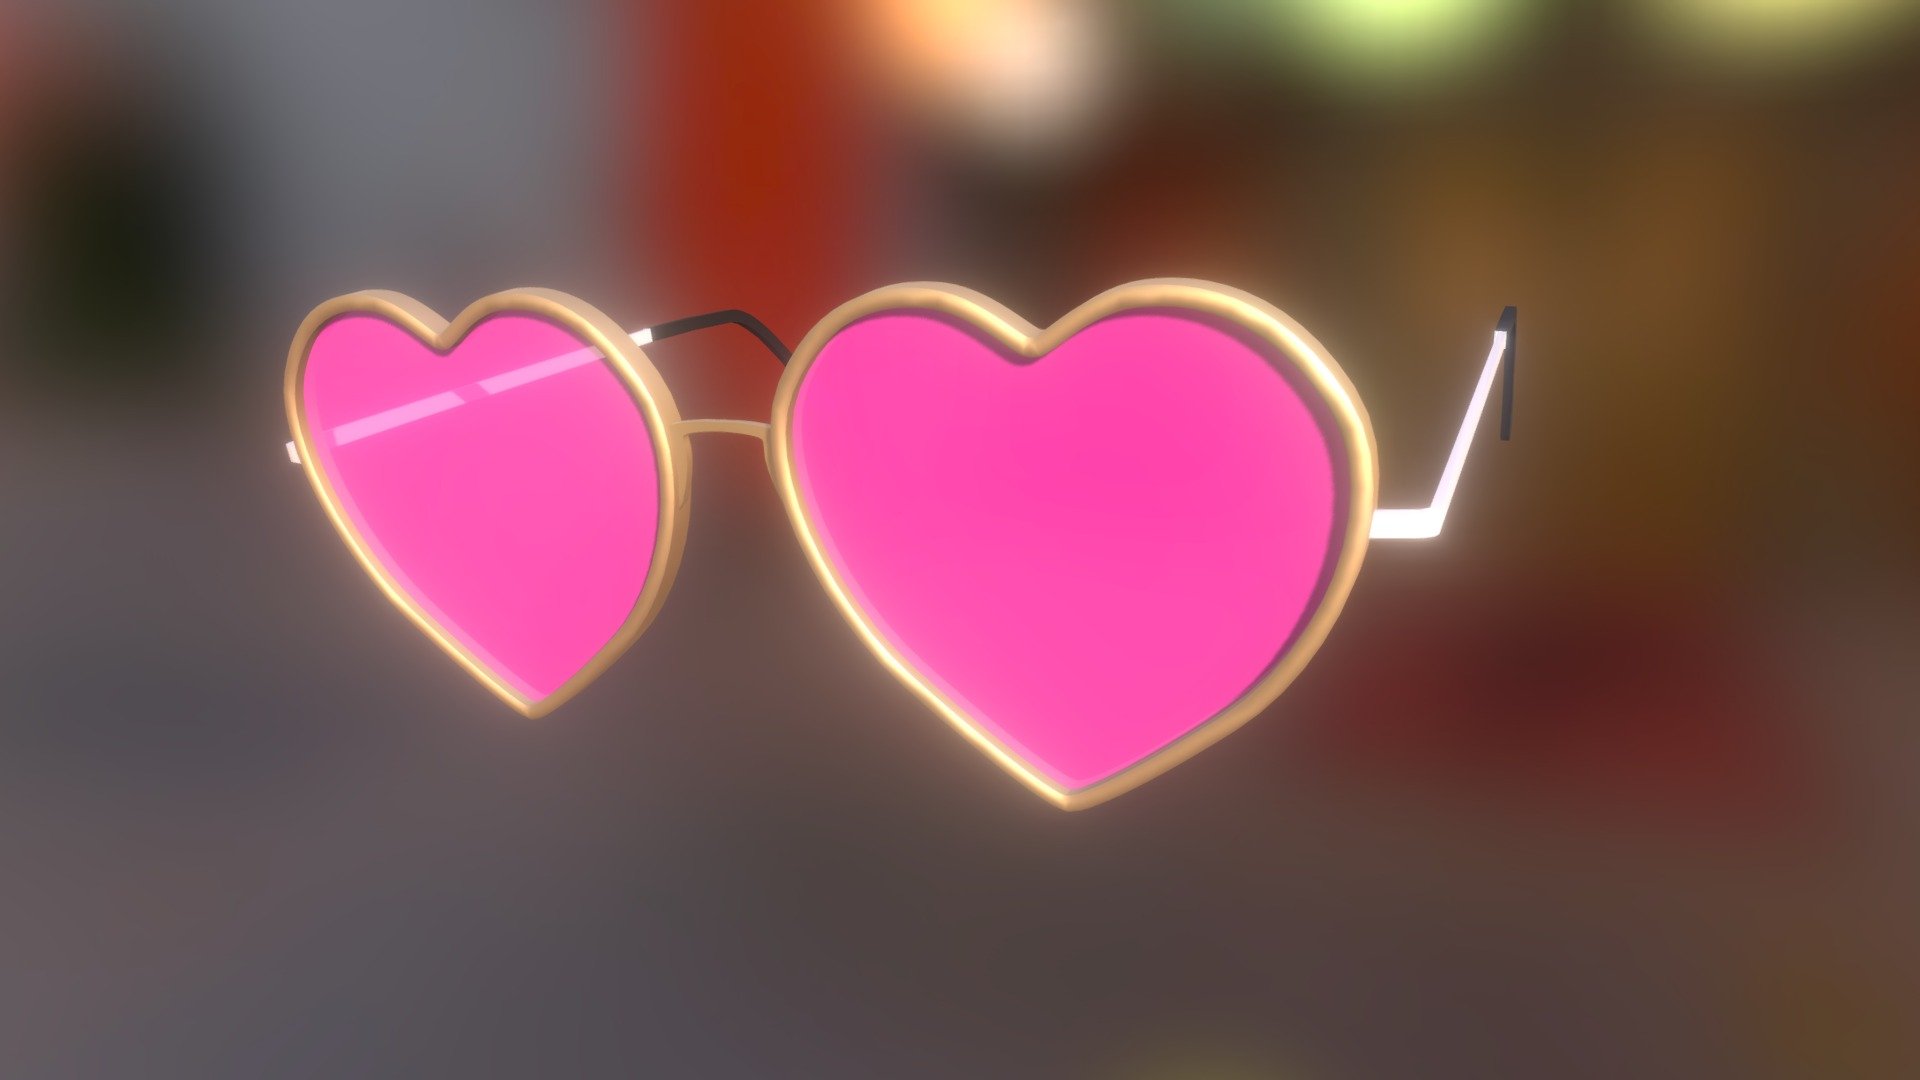 Pink Heart Glasses for Girl/Boy, also can be used for any Comedy Project.

Created with Cinema 4D and ZBrush 3d model